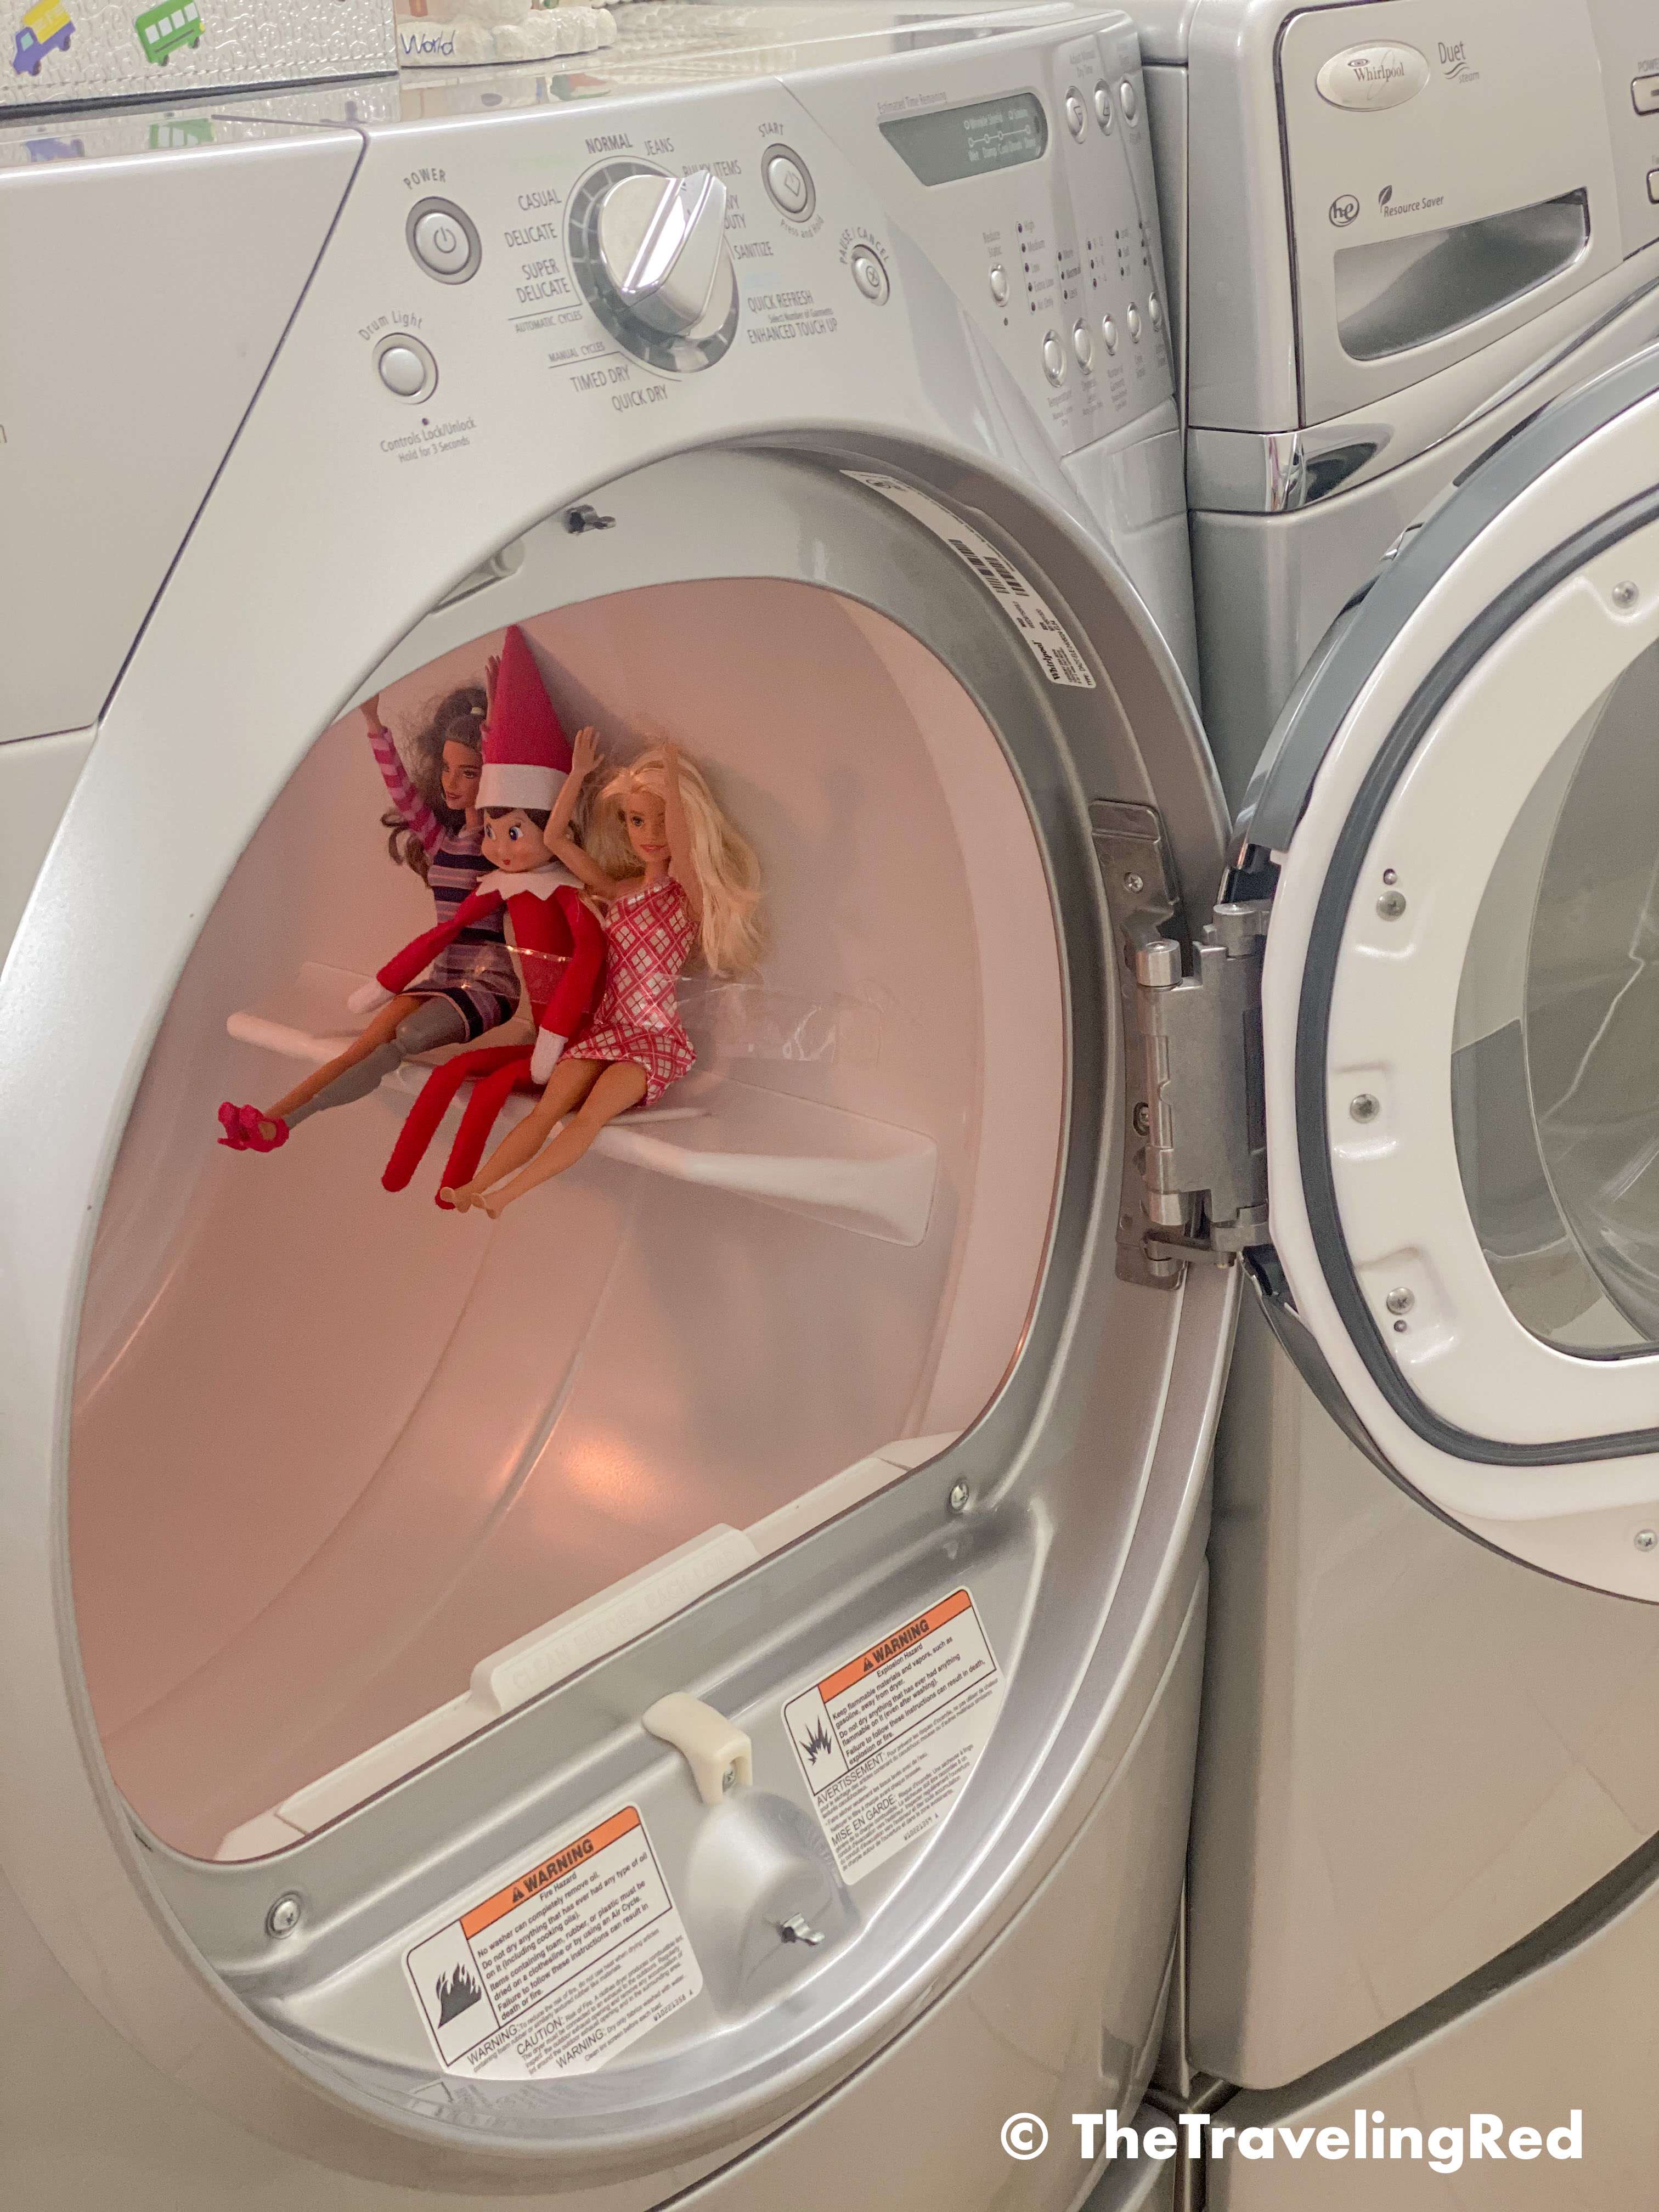 Naughty Elf on the shelf turned our dryer into an amusement park ride and took some barbies along for the fun. You only need tape. Fun and easy elf on the shelf ideas for a naughty elf that are quick and easy using things you have at home.